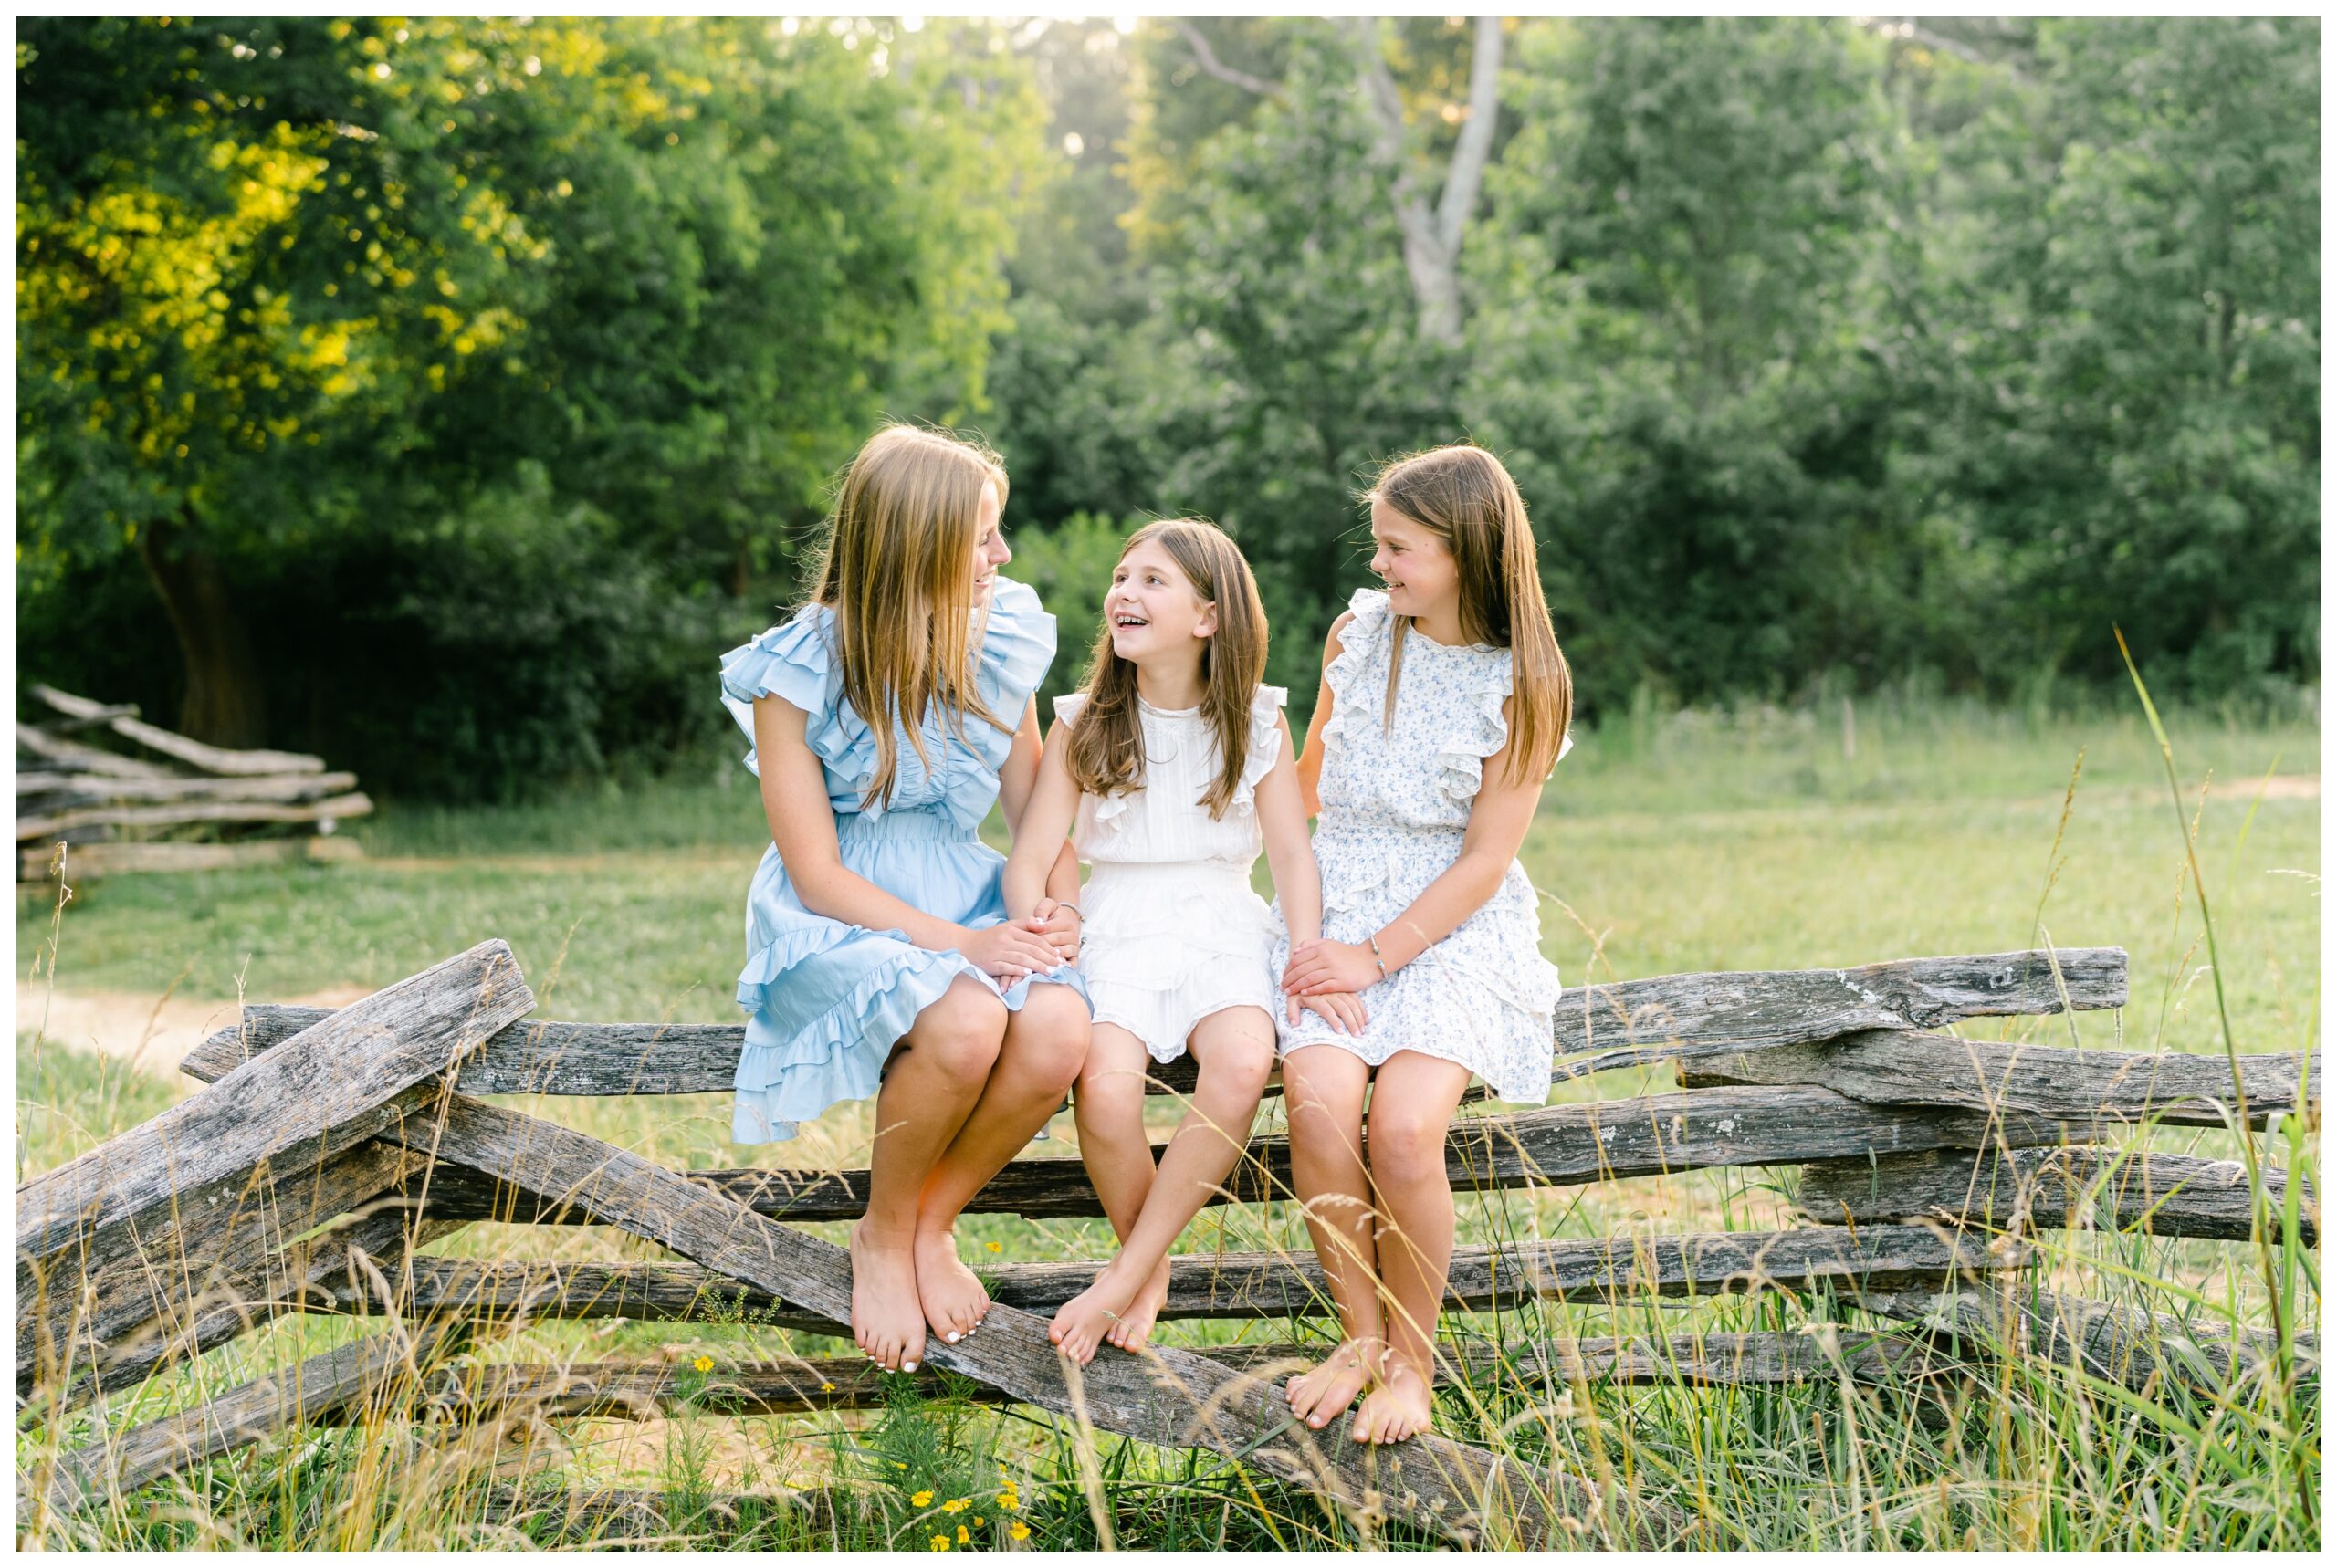 Portrait of three sisters sitting on a wooden fence smiling at one another.